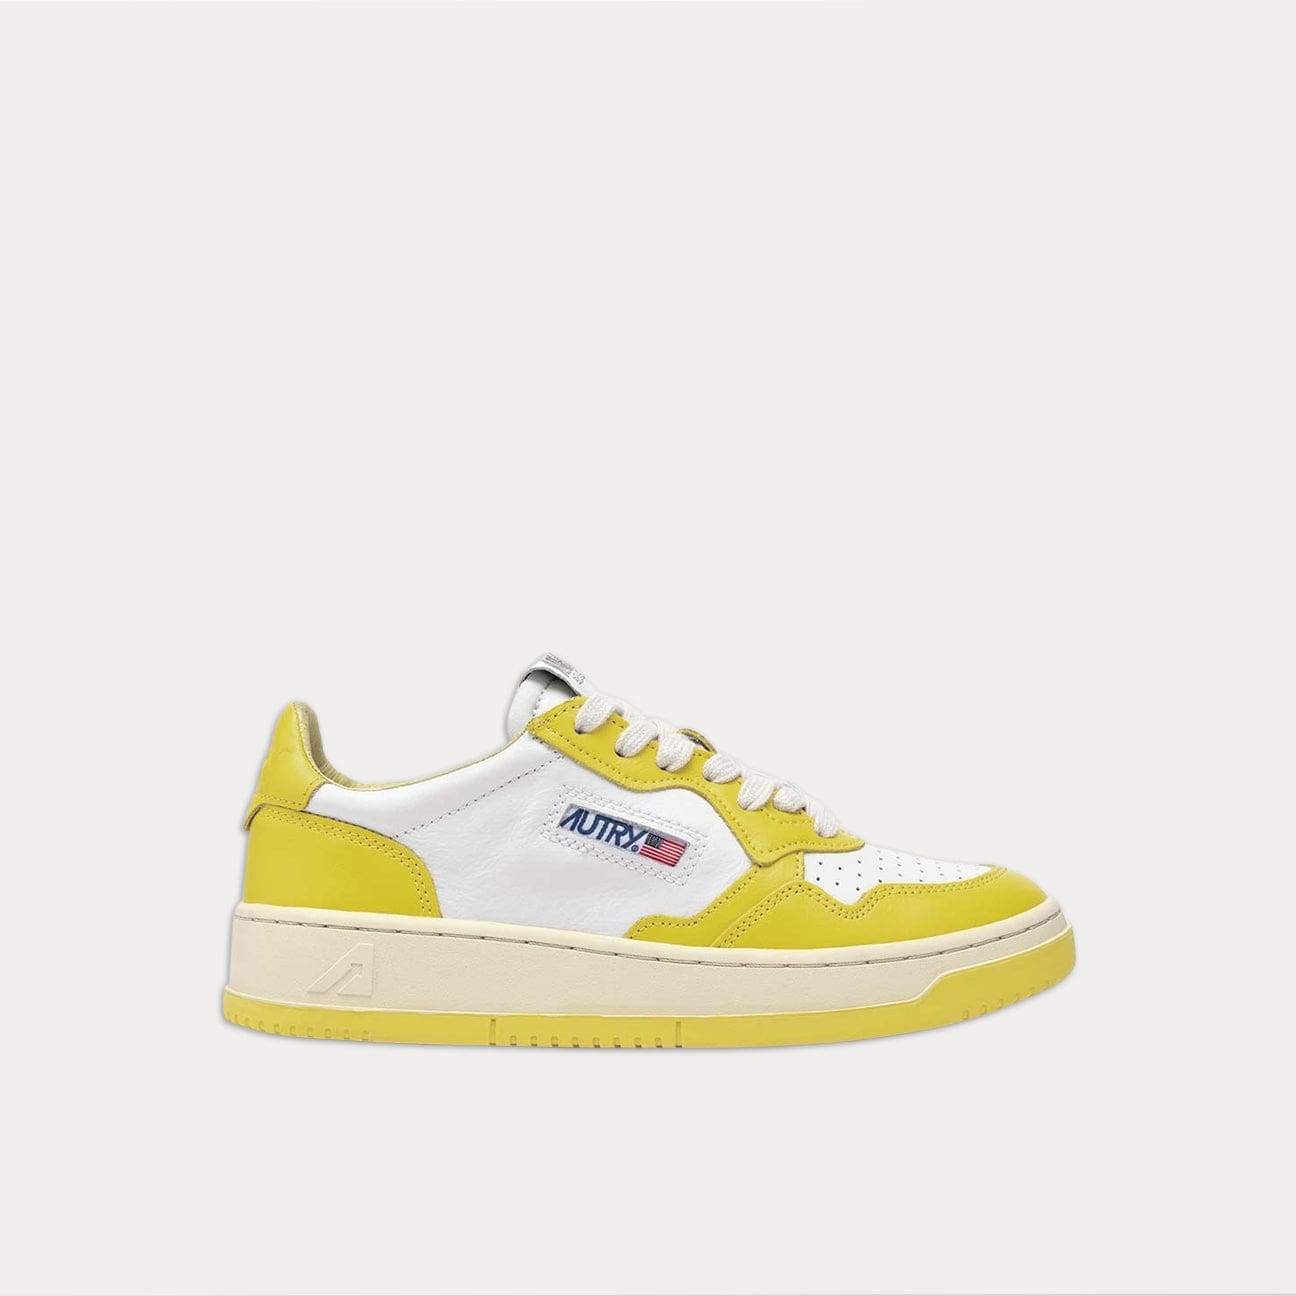 AUTRY Sneakers Autry WB23 Giallo